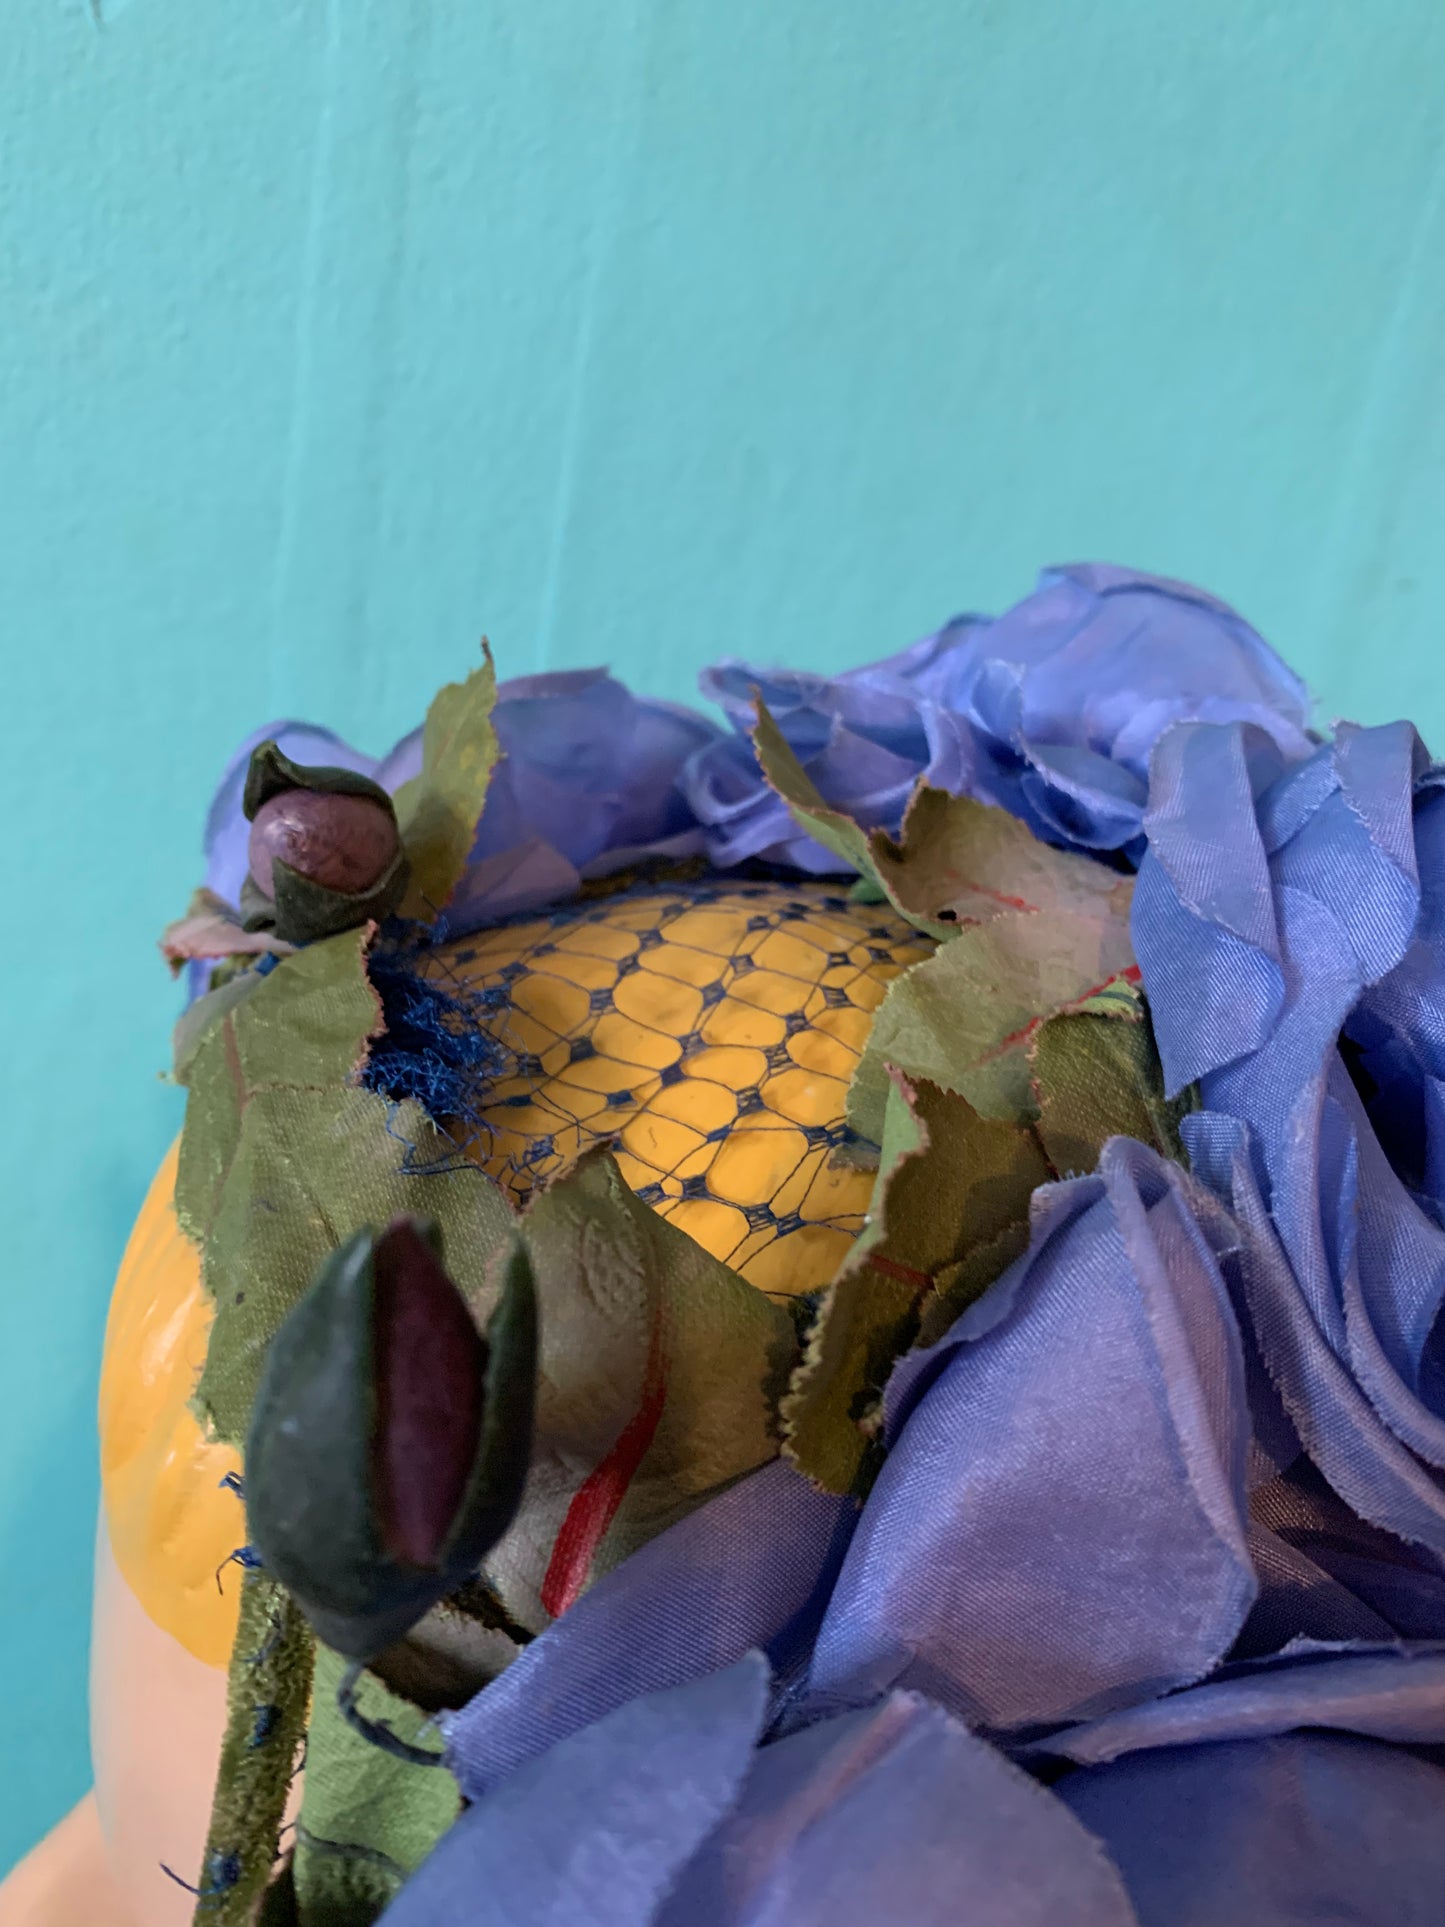 BIG Periwinkle Roses Flower Wrap Over Summer Hat circa 1960s